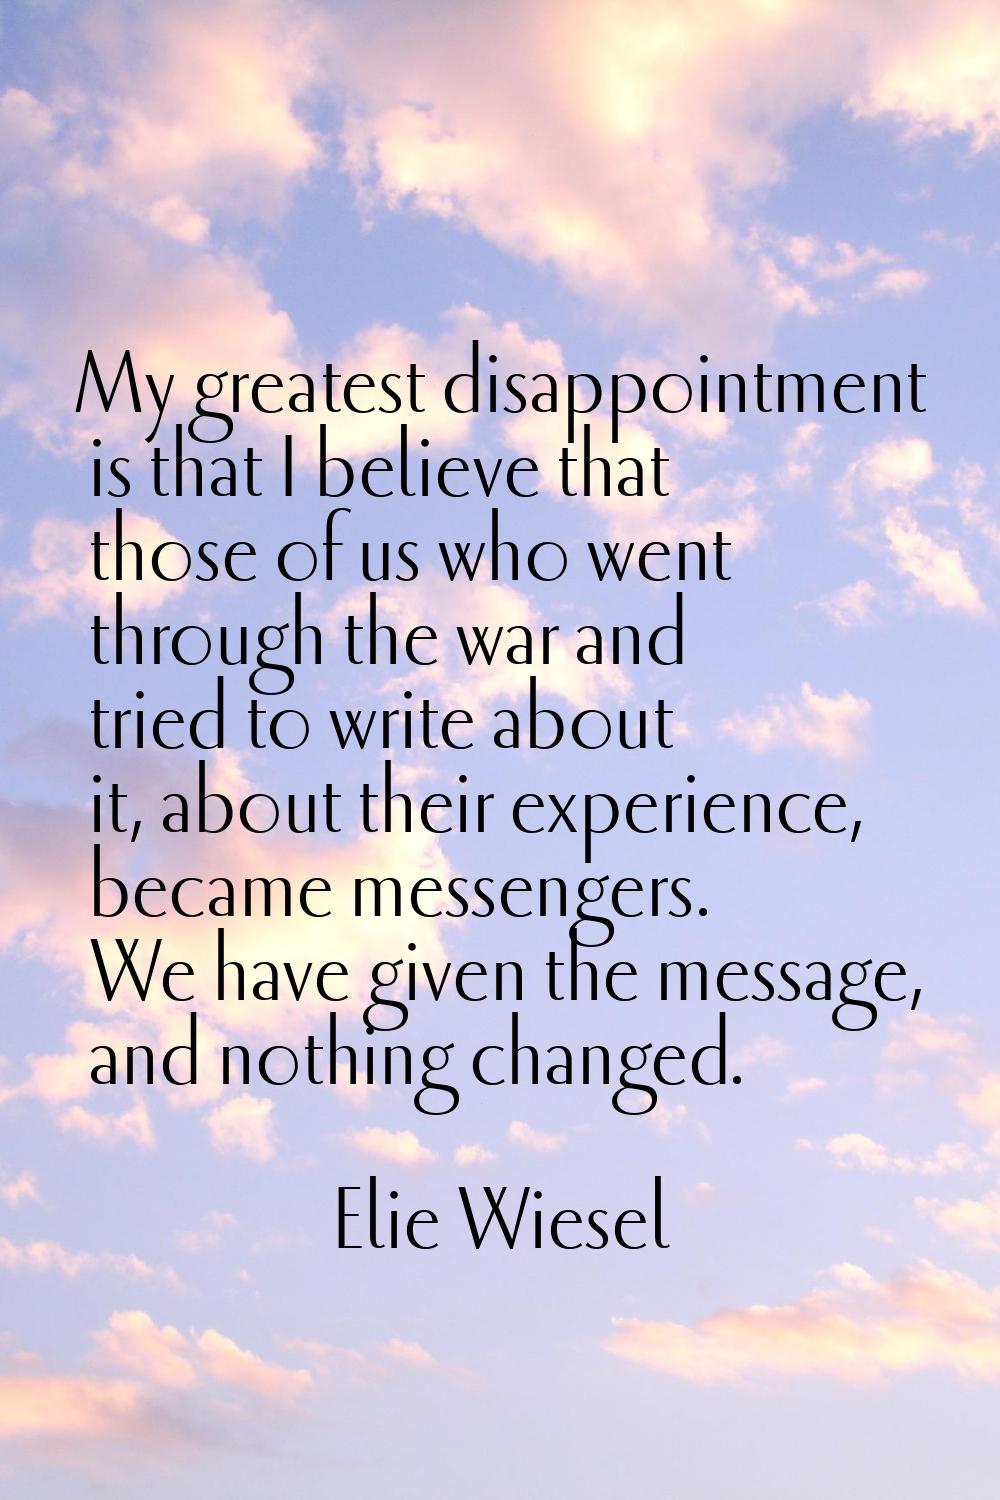 My greatest disappointment is that I believe that those of us who went through the war and tried to